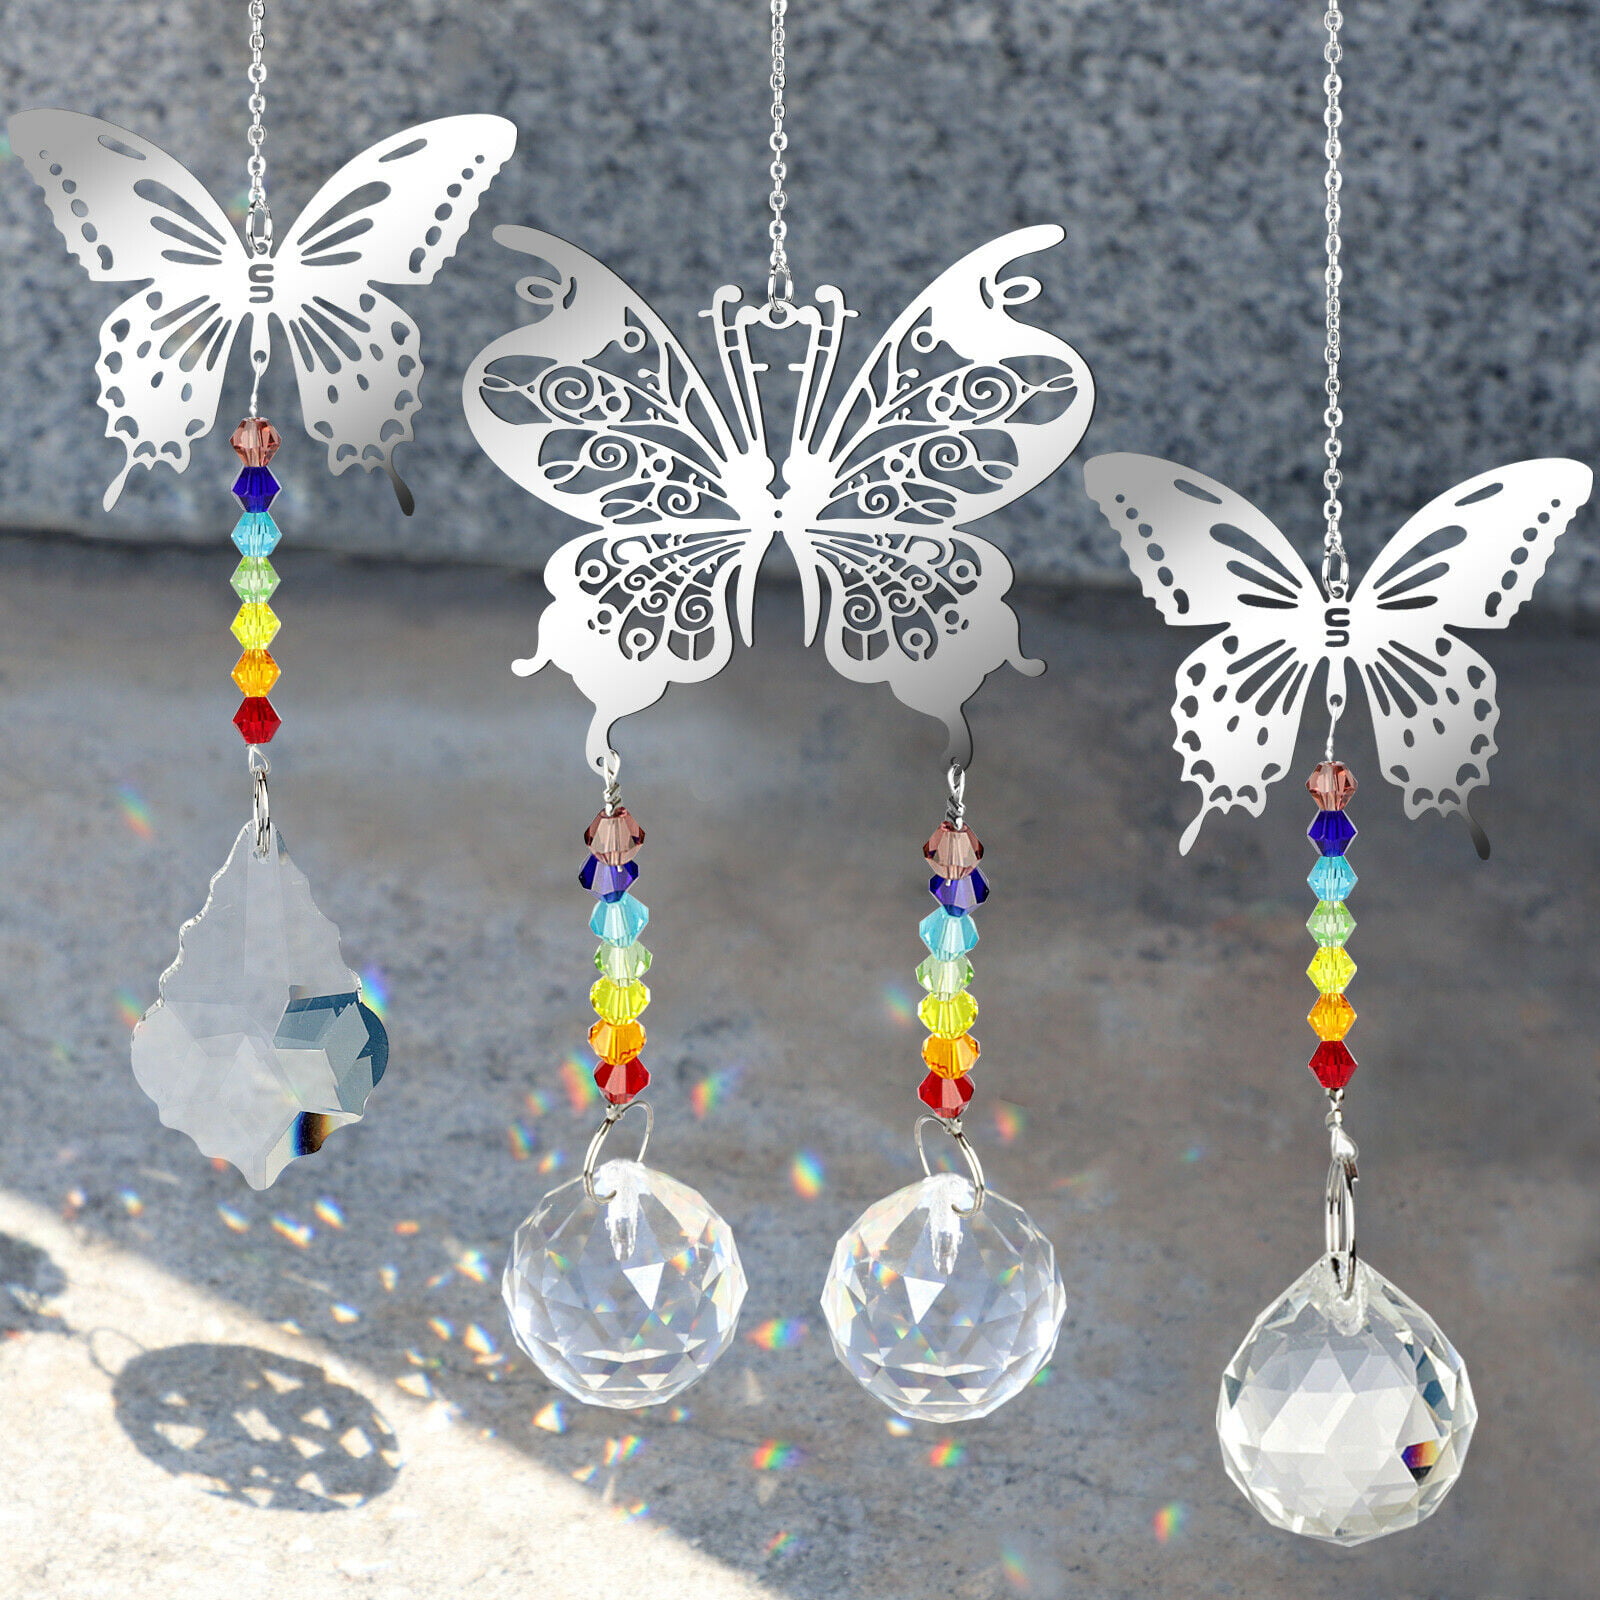 Details about   Crystal Butterfly Prisms Ball Home Party Hanging Ornament Car Pendant Decor 